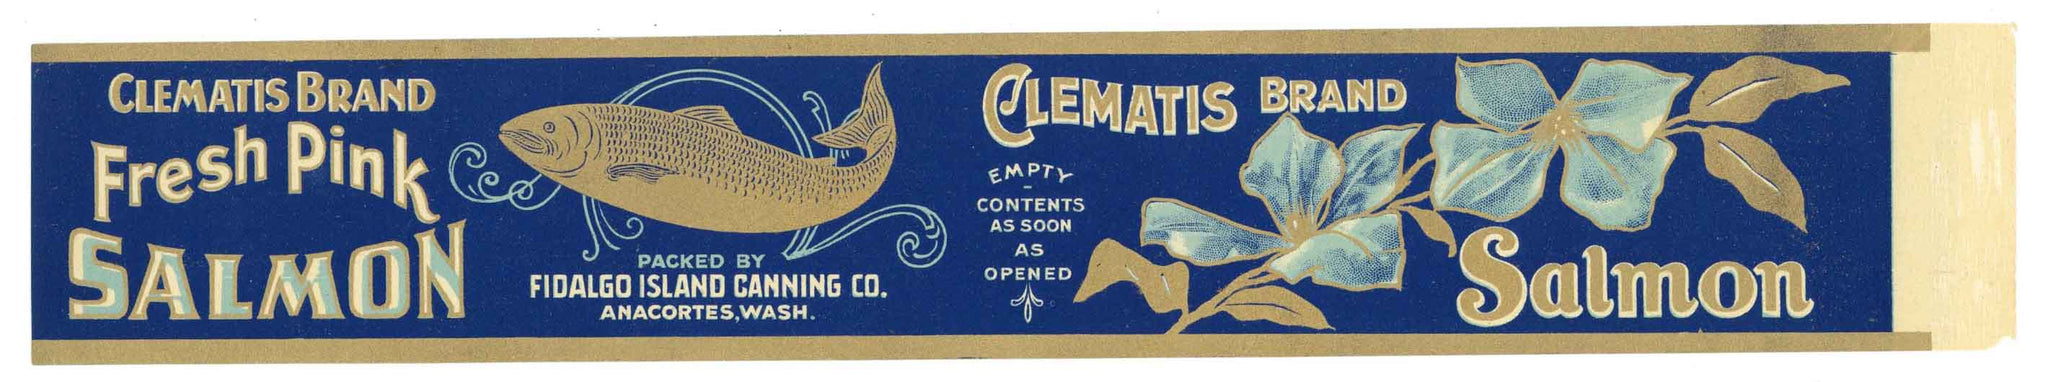 Clematis Brand Vintage Salmon Can Label, large flat